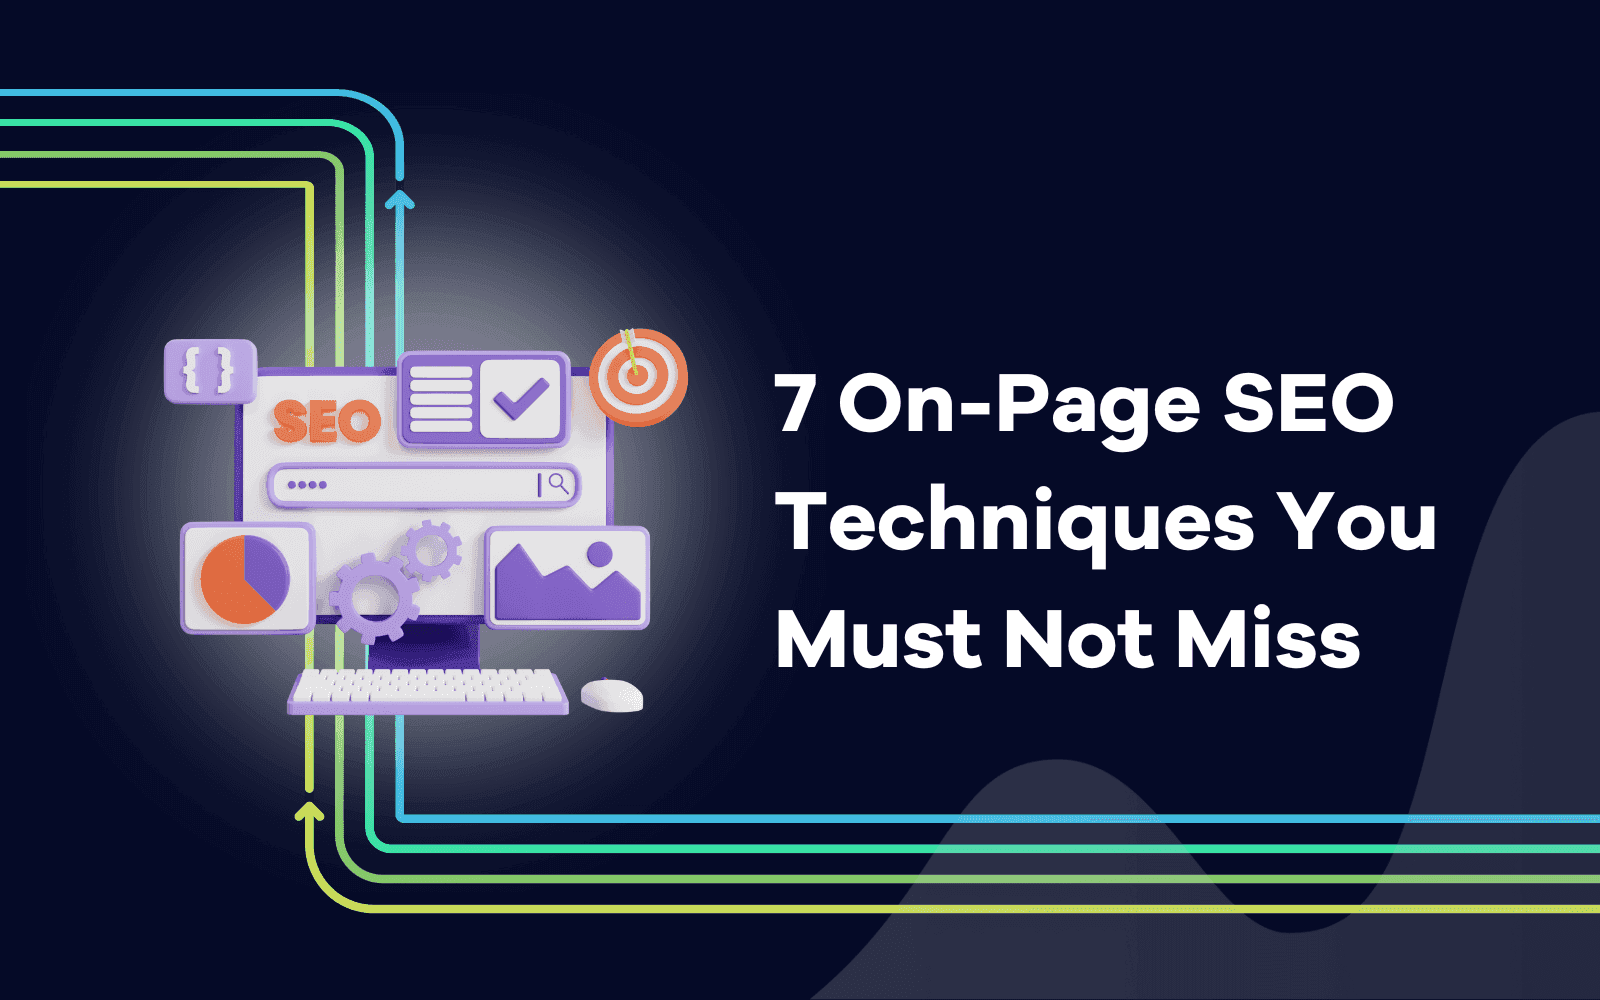 On-Page SEO Techniques You Must Not Miss